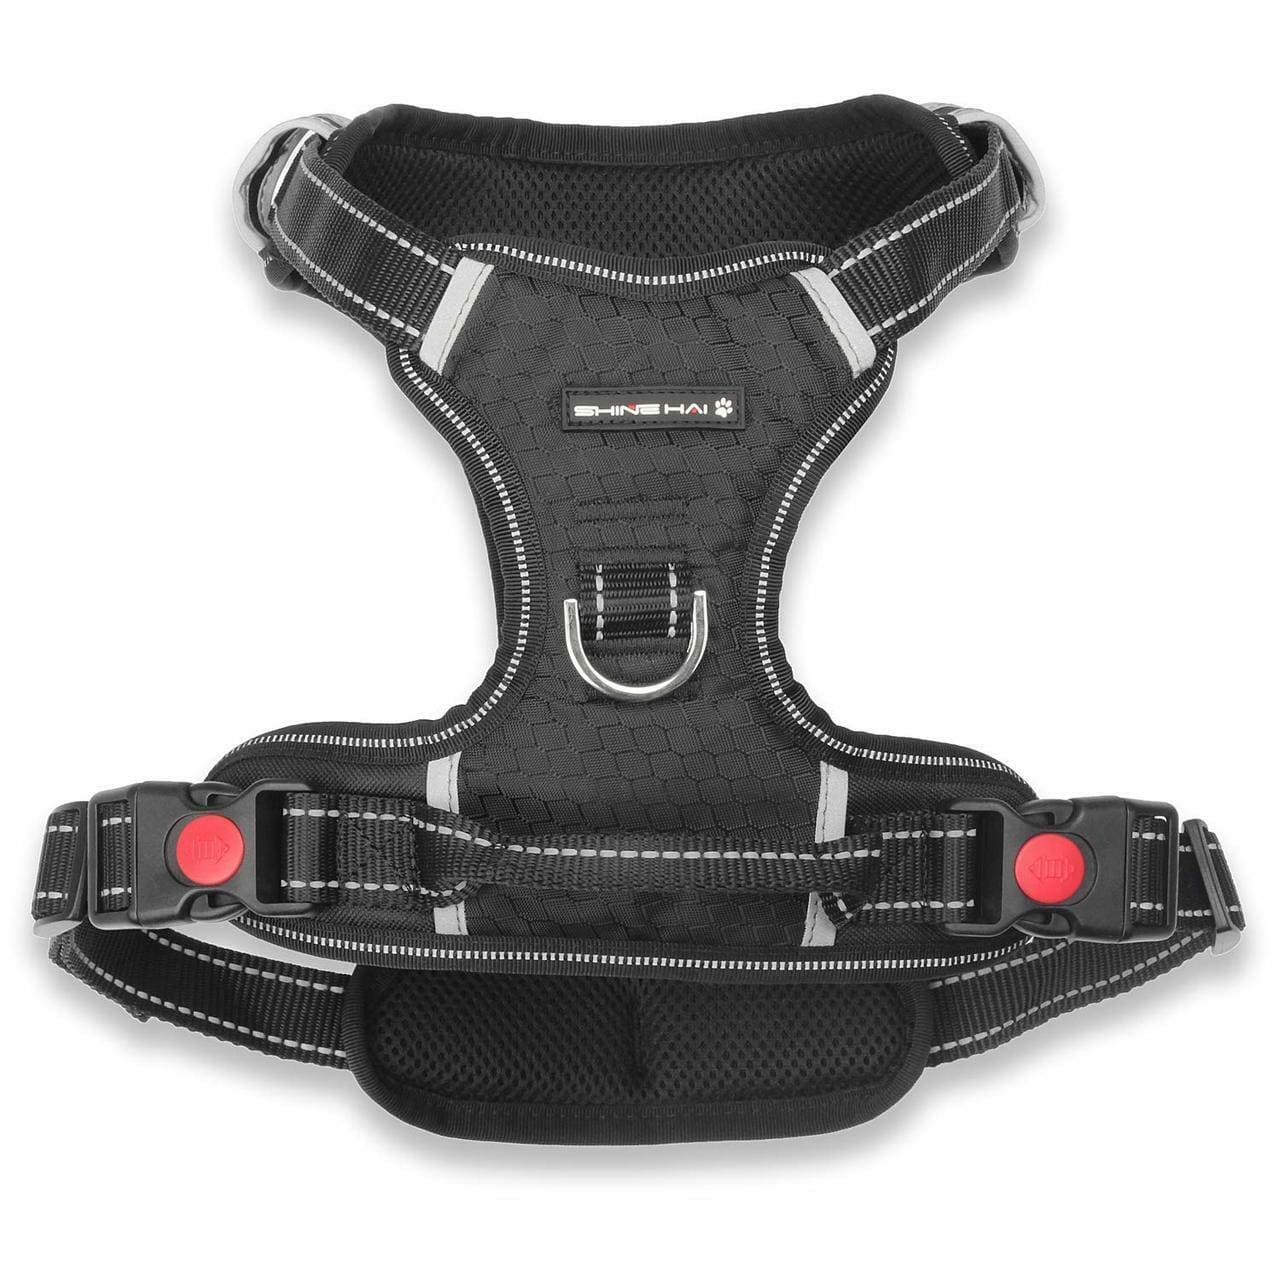 Premium No Pull Dog Harness, Adjustable Pet Soft Vest Harness with Reflective Oxford Material, Perfect for Large Medium Dogs Walking Training Outdoor